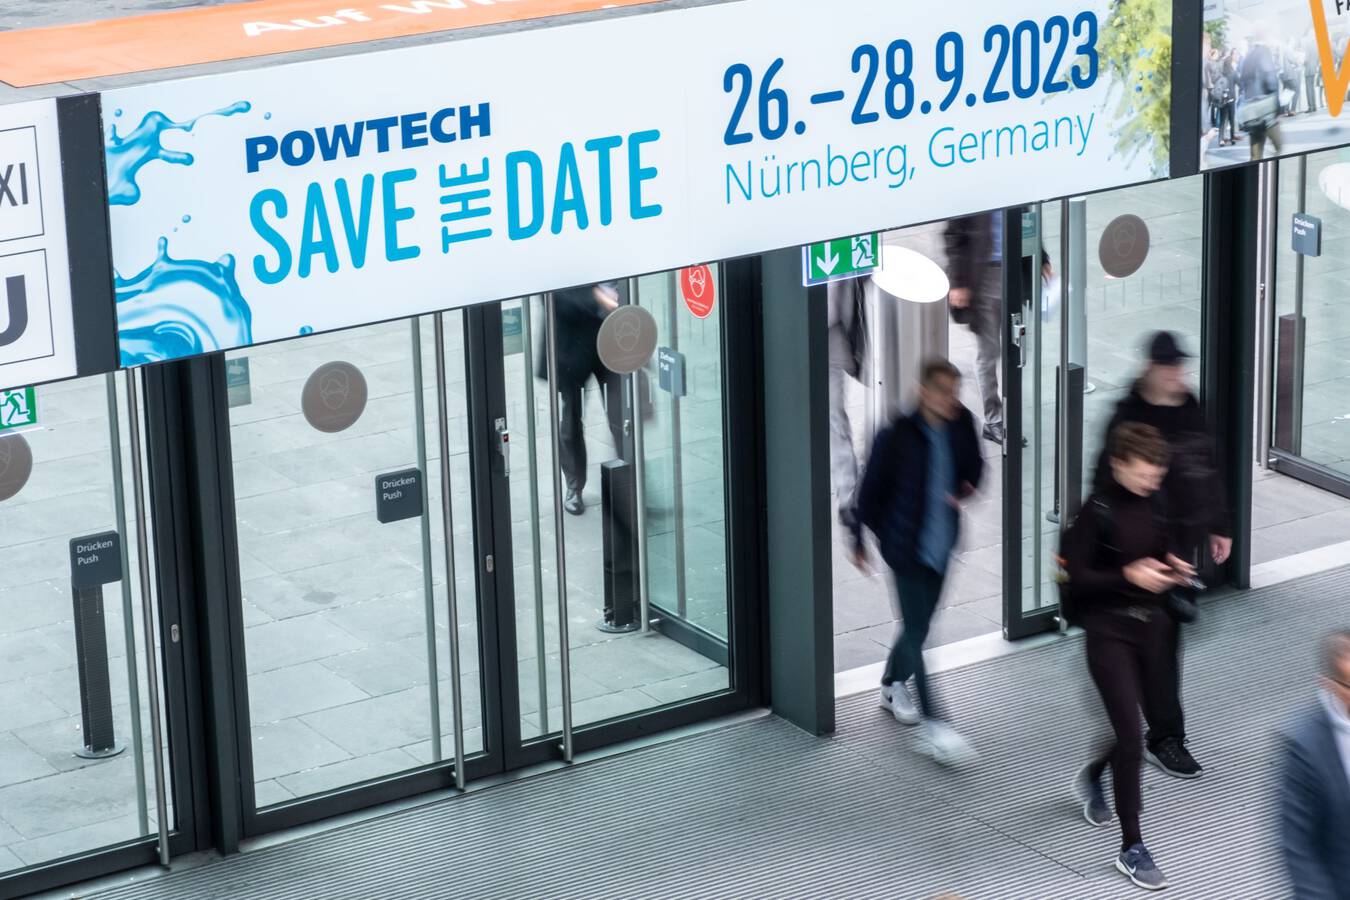 POWTECH 2023: A flying start with new themes and technologies POWTECH is getting off to a flying start. The Leading International Processing Trade Fair will take place in Nuremberg from 26 to 28 September 2023 – almost exactly a year after POWTECH 2022.